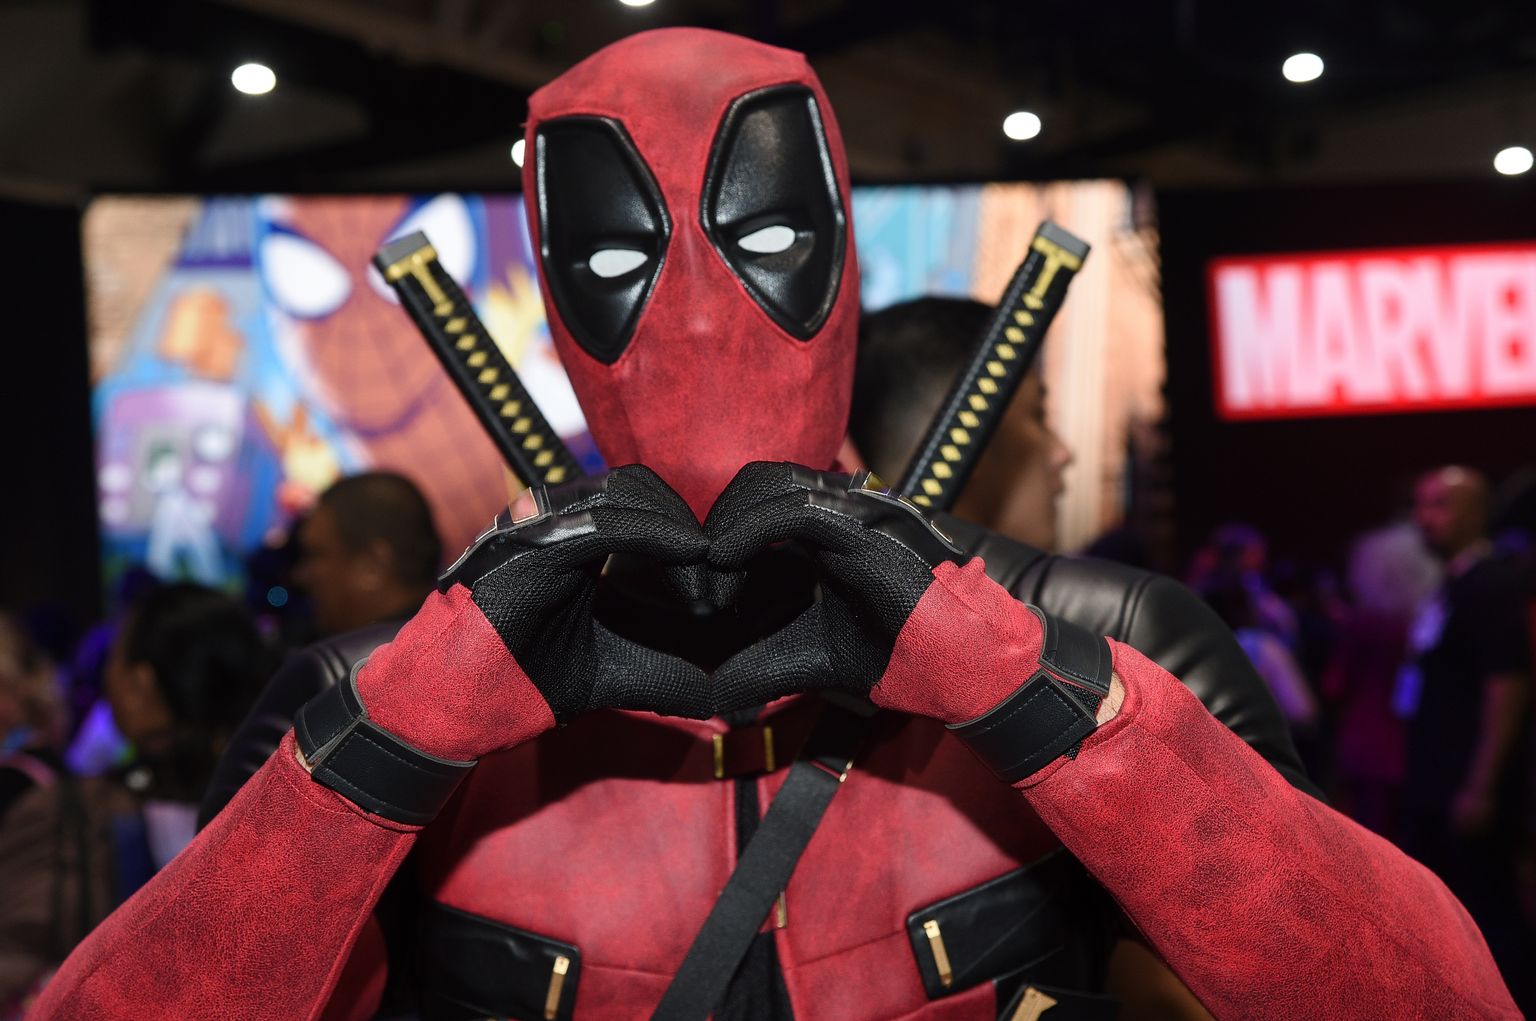 Surprise Screening of ‘Deadpool & Wolverine’ Thrills Comic-Con: Stars and Fans Unite for Marvel’s Latest Hit